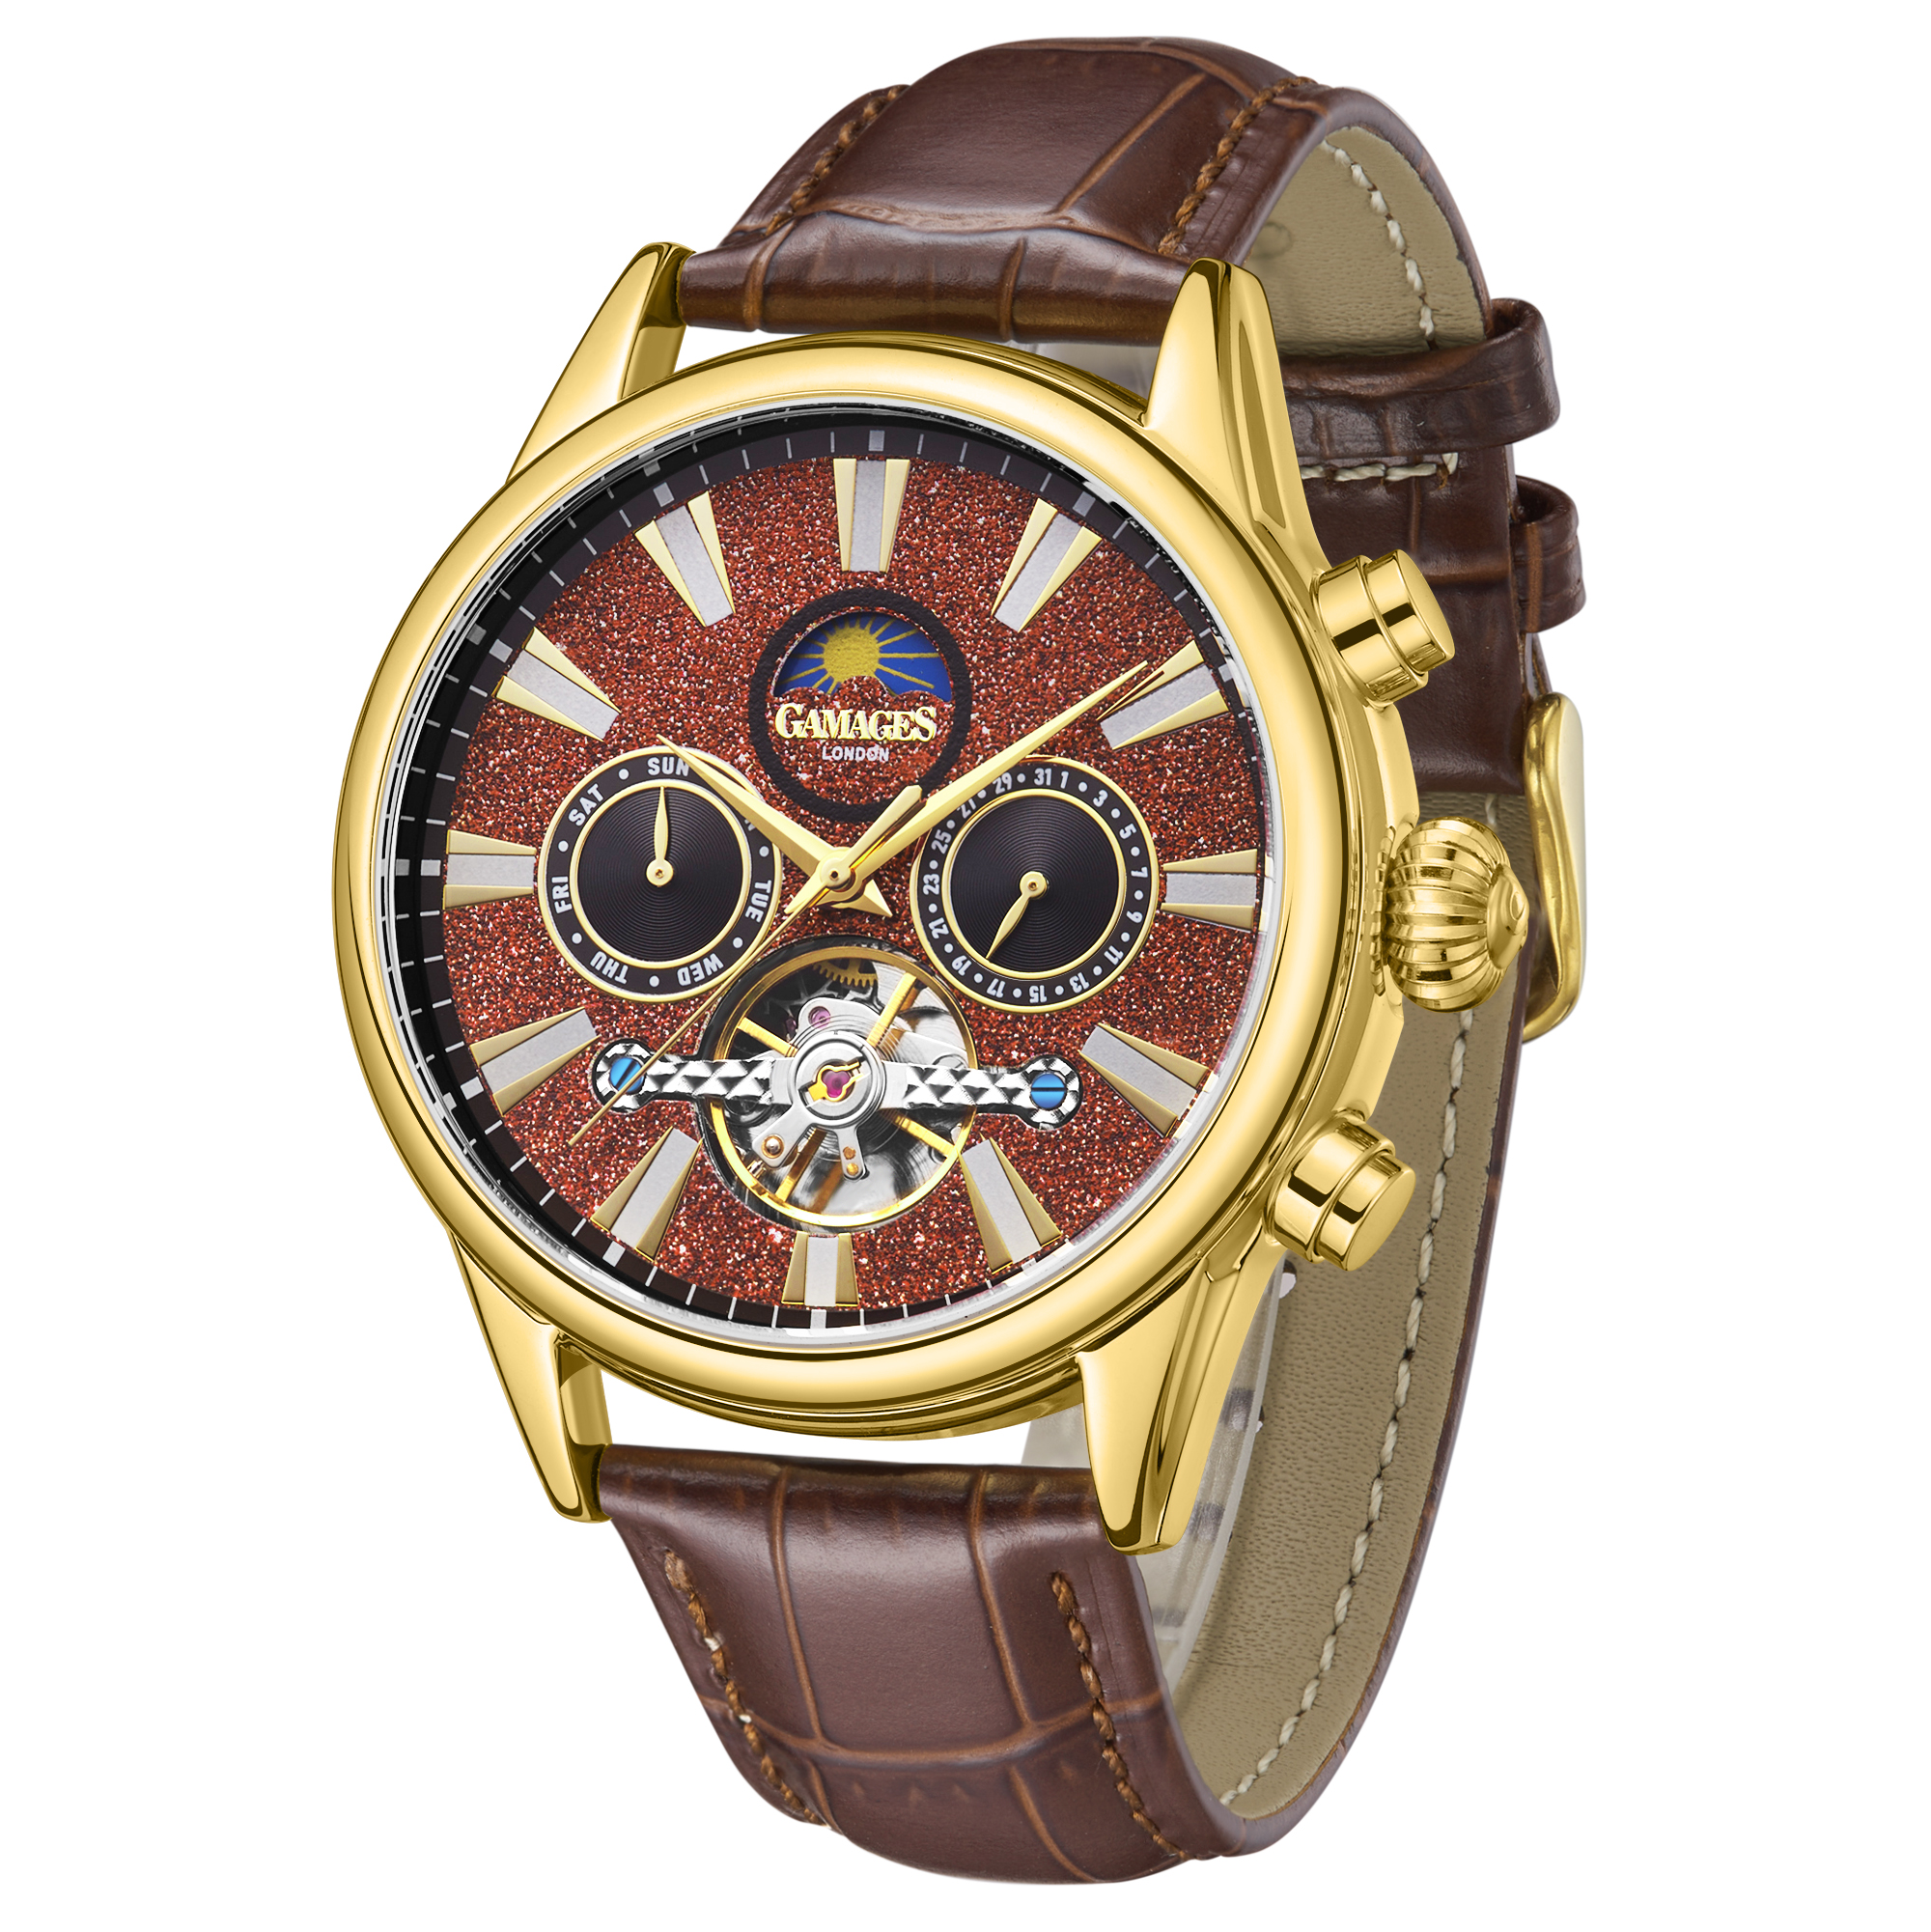 Gamages of London Hand Assembled Telescope Automatic Gold Cherry- 5 Year Warranty and Free Delive... - Image 4 of 5